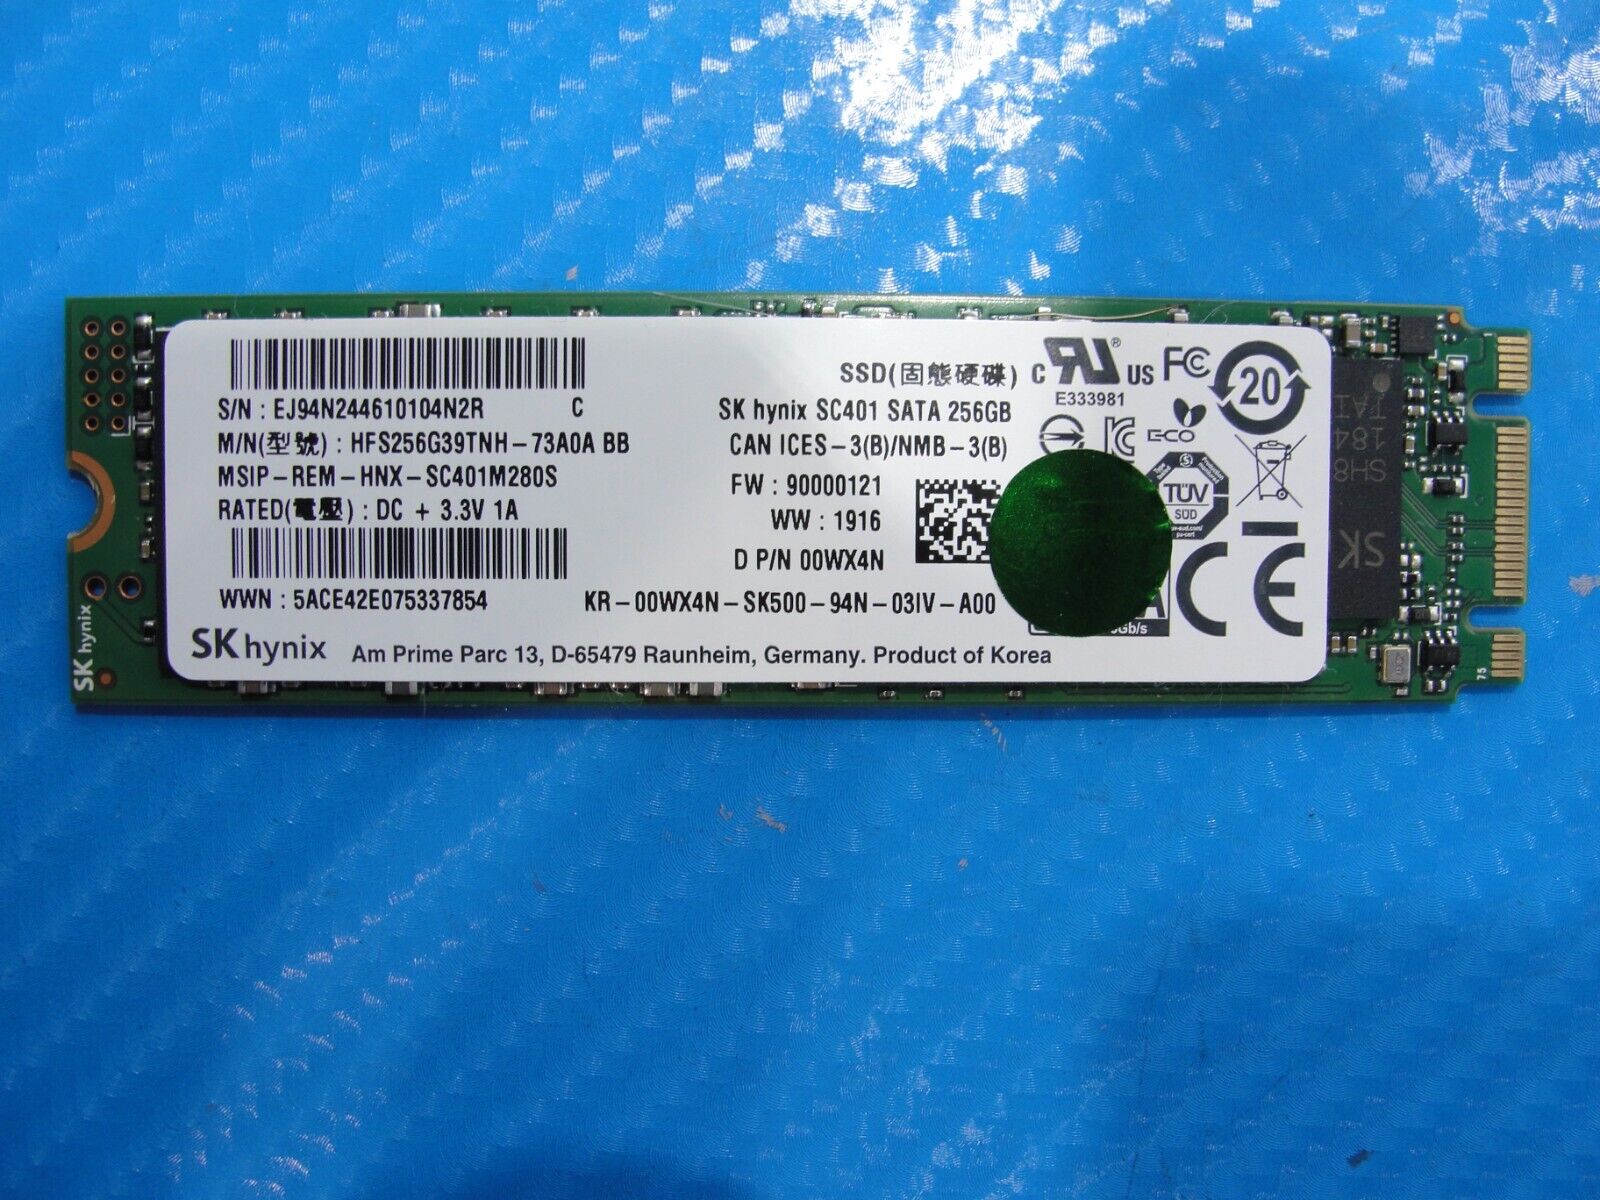 Acer PH315-54-760S SK hynix 256GB SATA M.2 Solid State Drive HFS256G39TNH-73A0A